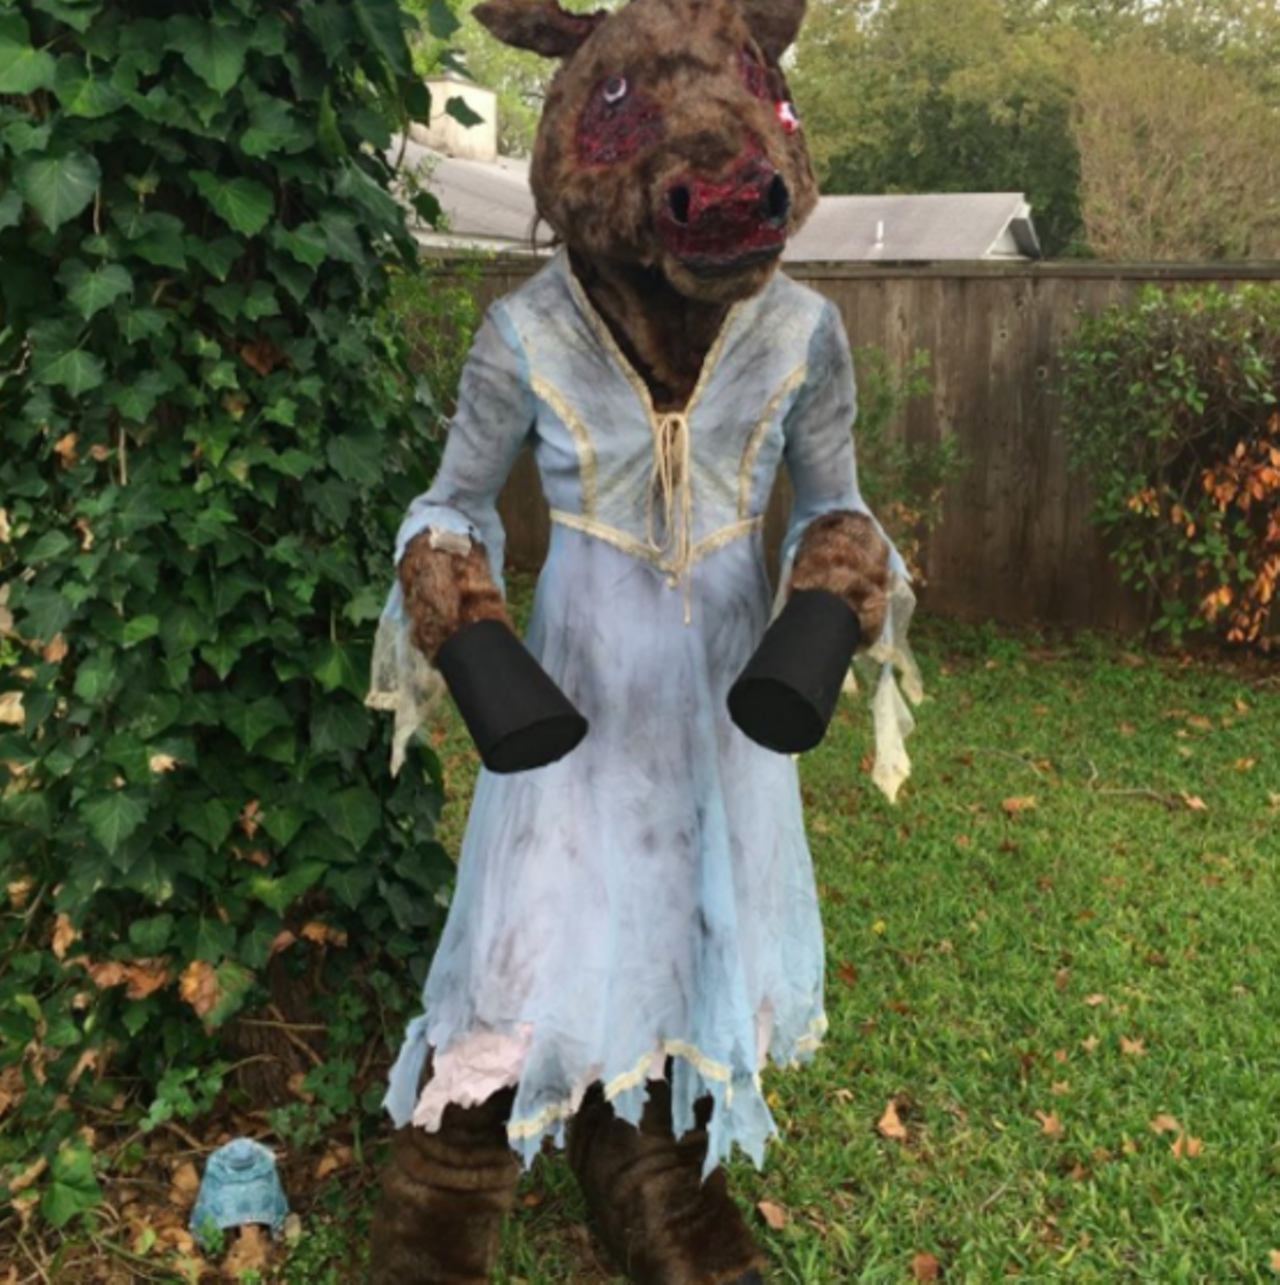 The Donkey Lady
La Llorona isn't your only option for a true San Anto-scary costume. This one may require some work, but think of the screams of terror you'll evoke.
Photo via Instagram / ashtenthorp32